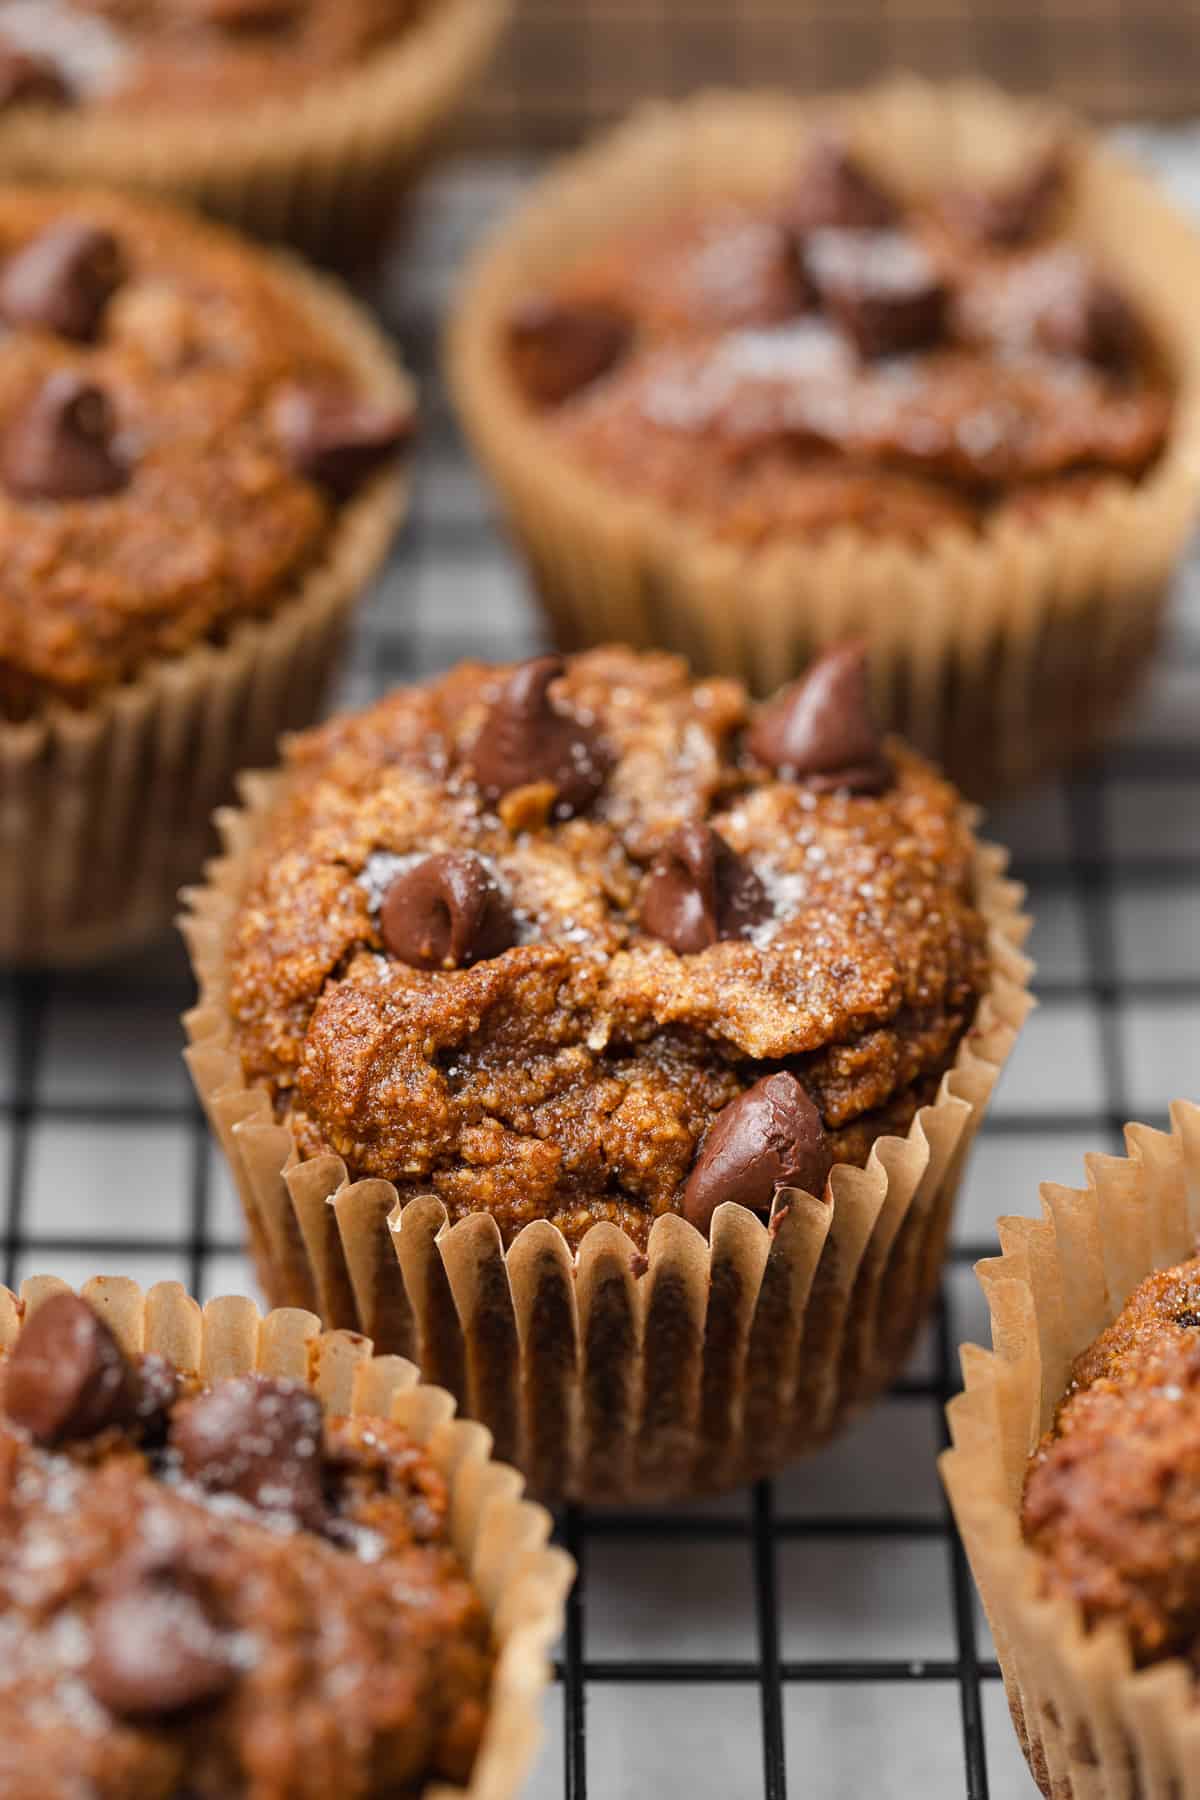 A closeup of a pumpkin muffin with chocolate chips.